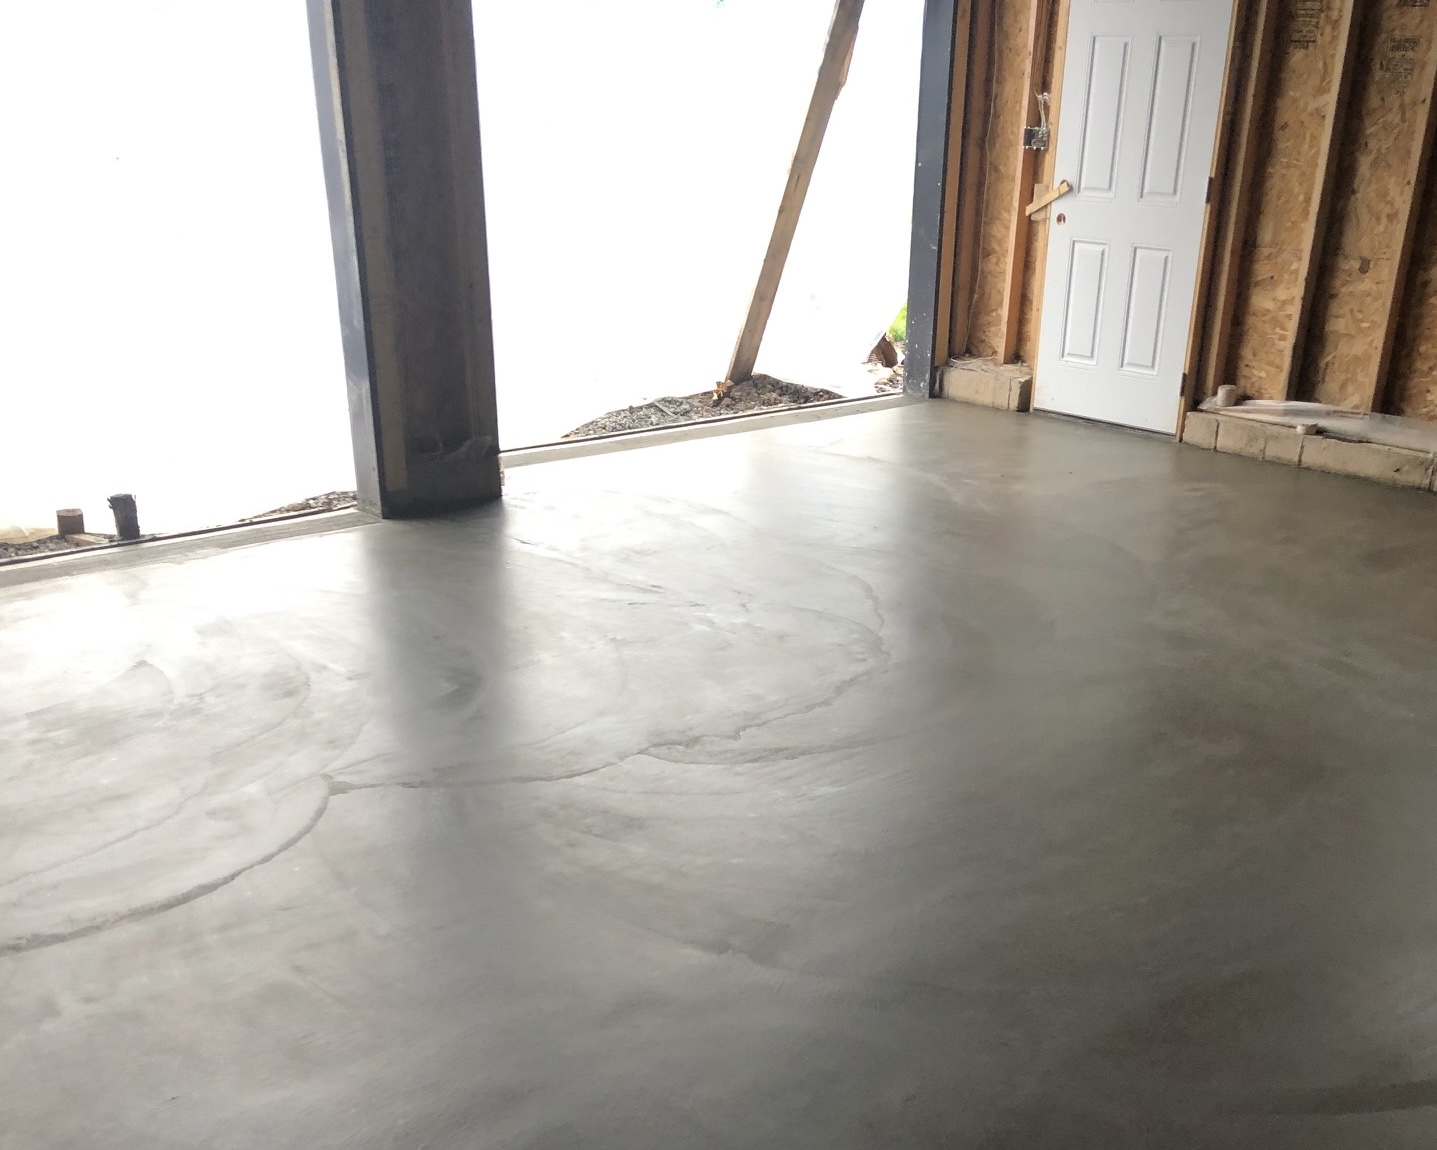 This photo shows a freshly poured concrete garage floor.